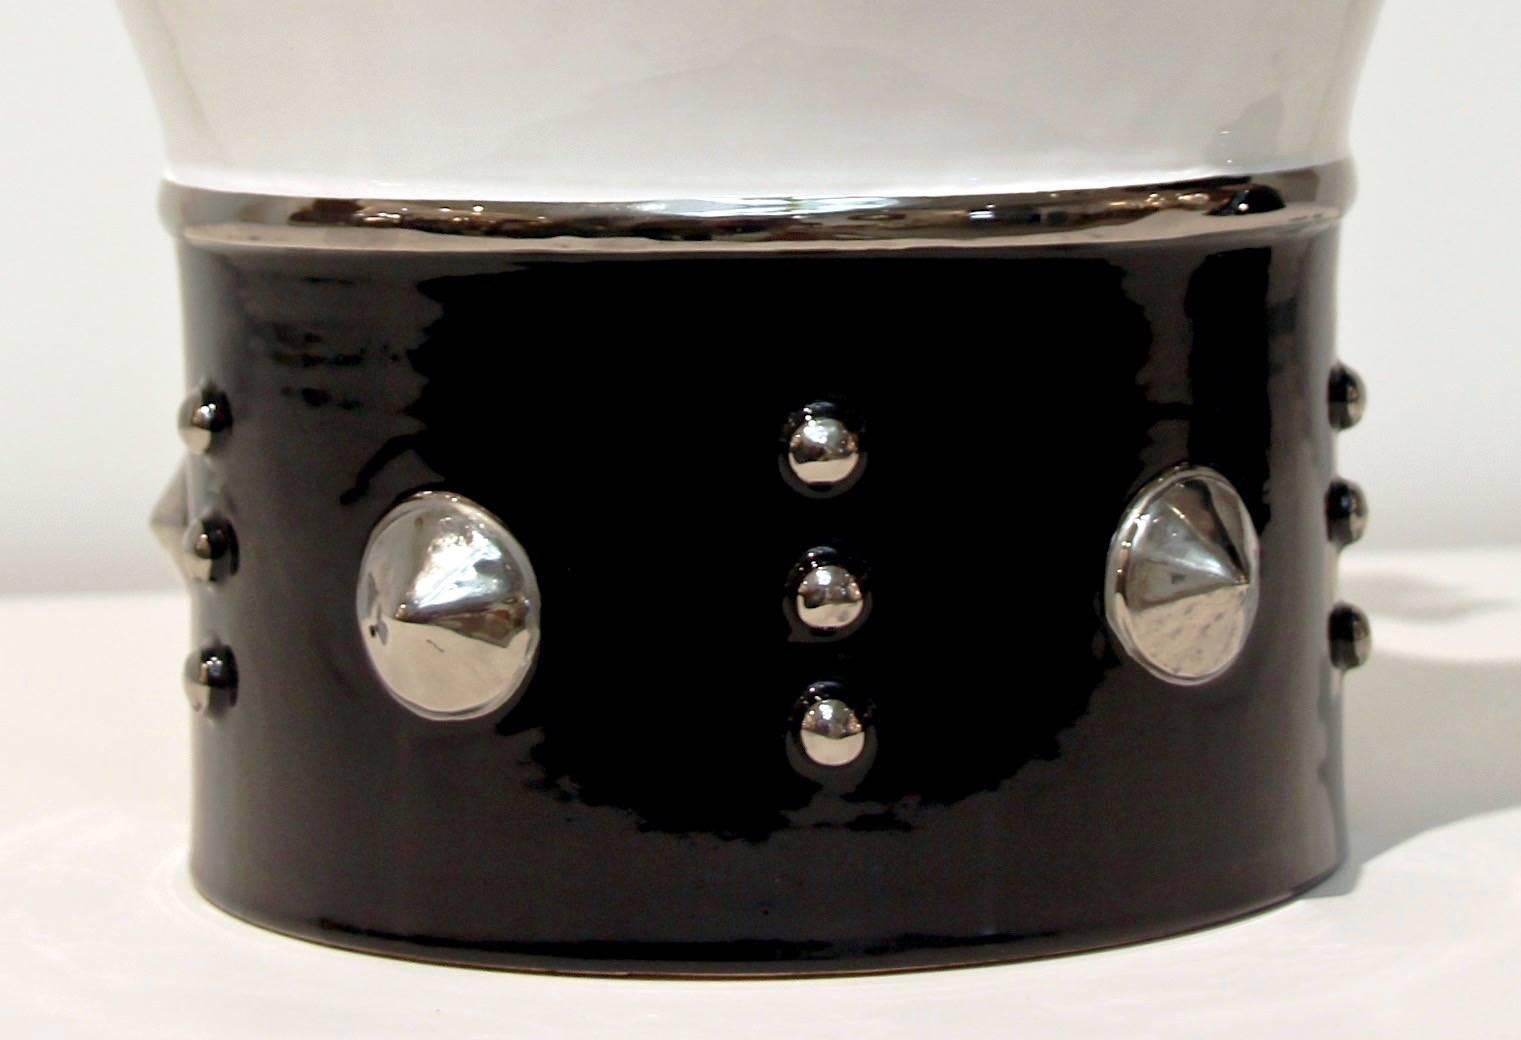 Contemporary Italian Enameled Black White Majolica Crown Bowl & Platinum Accents For Sale 1